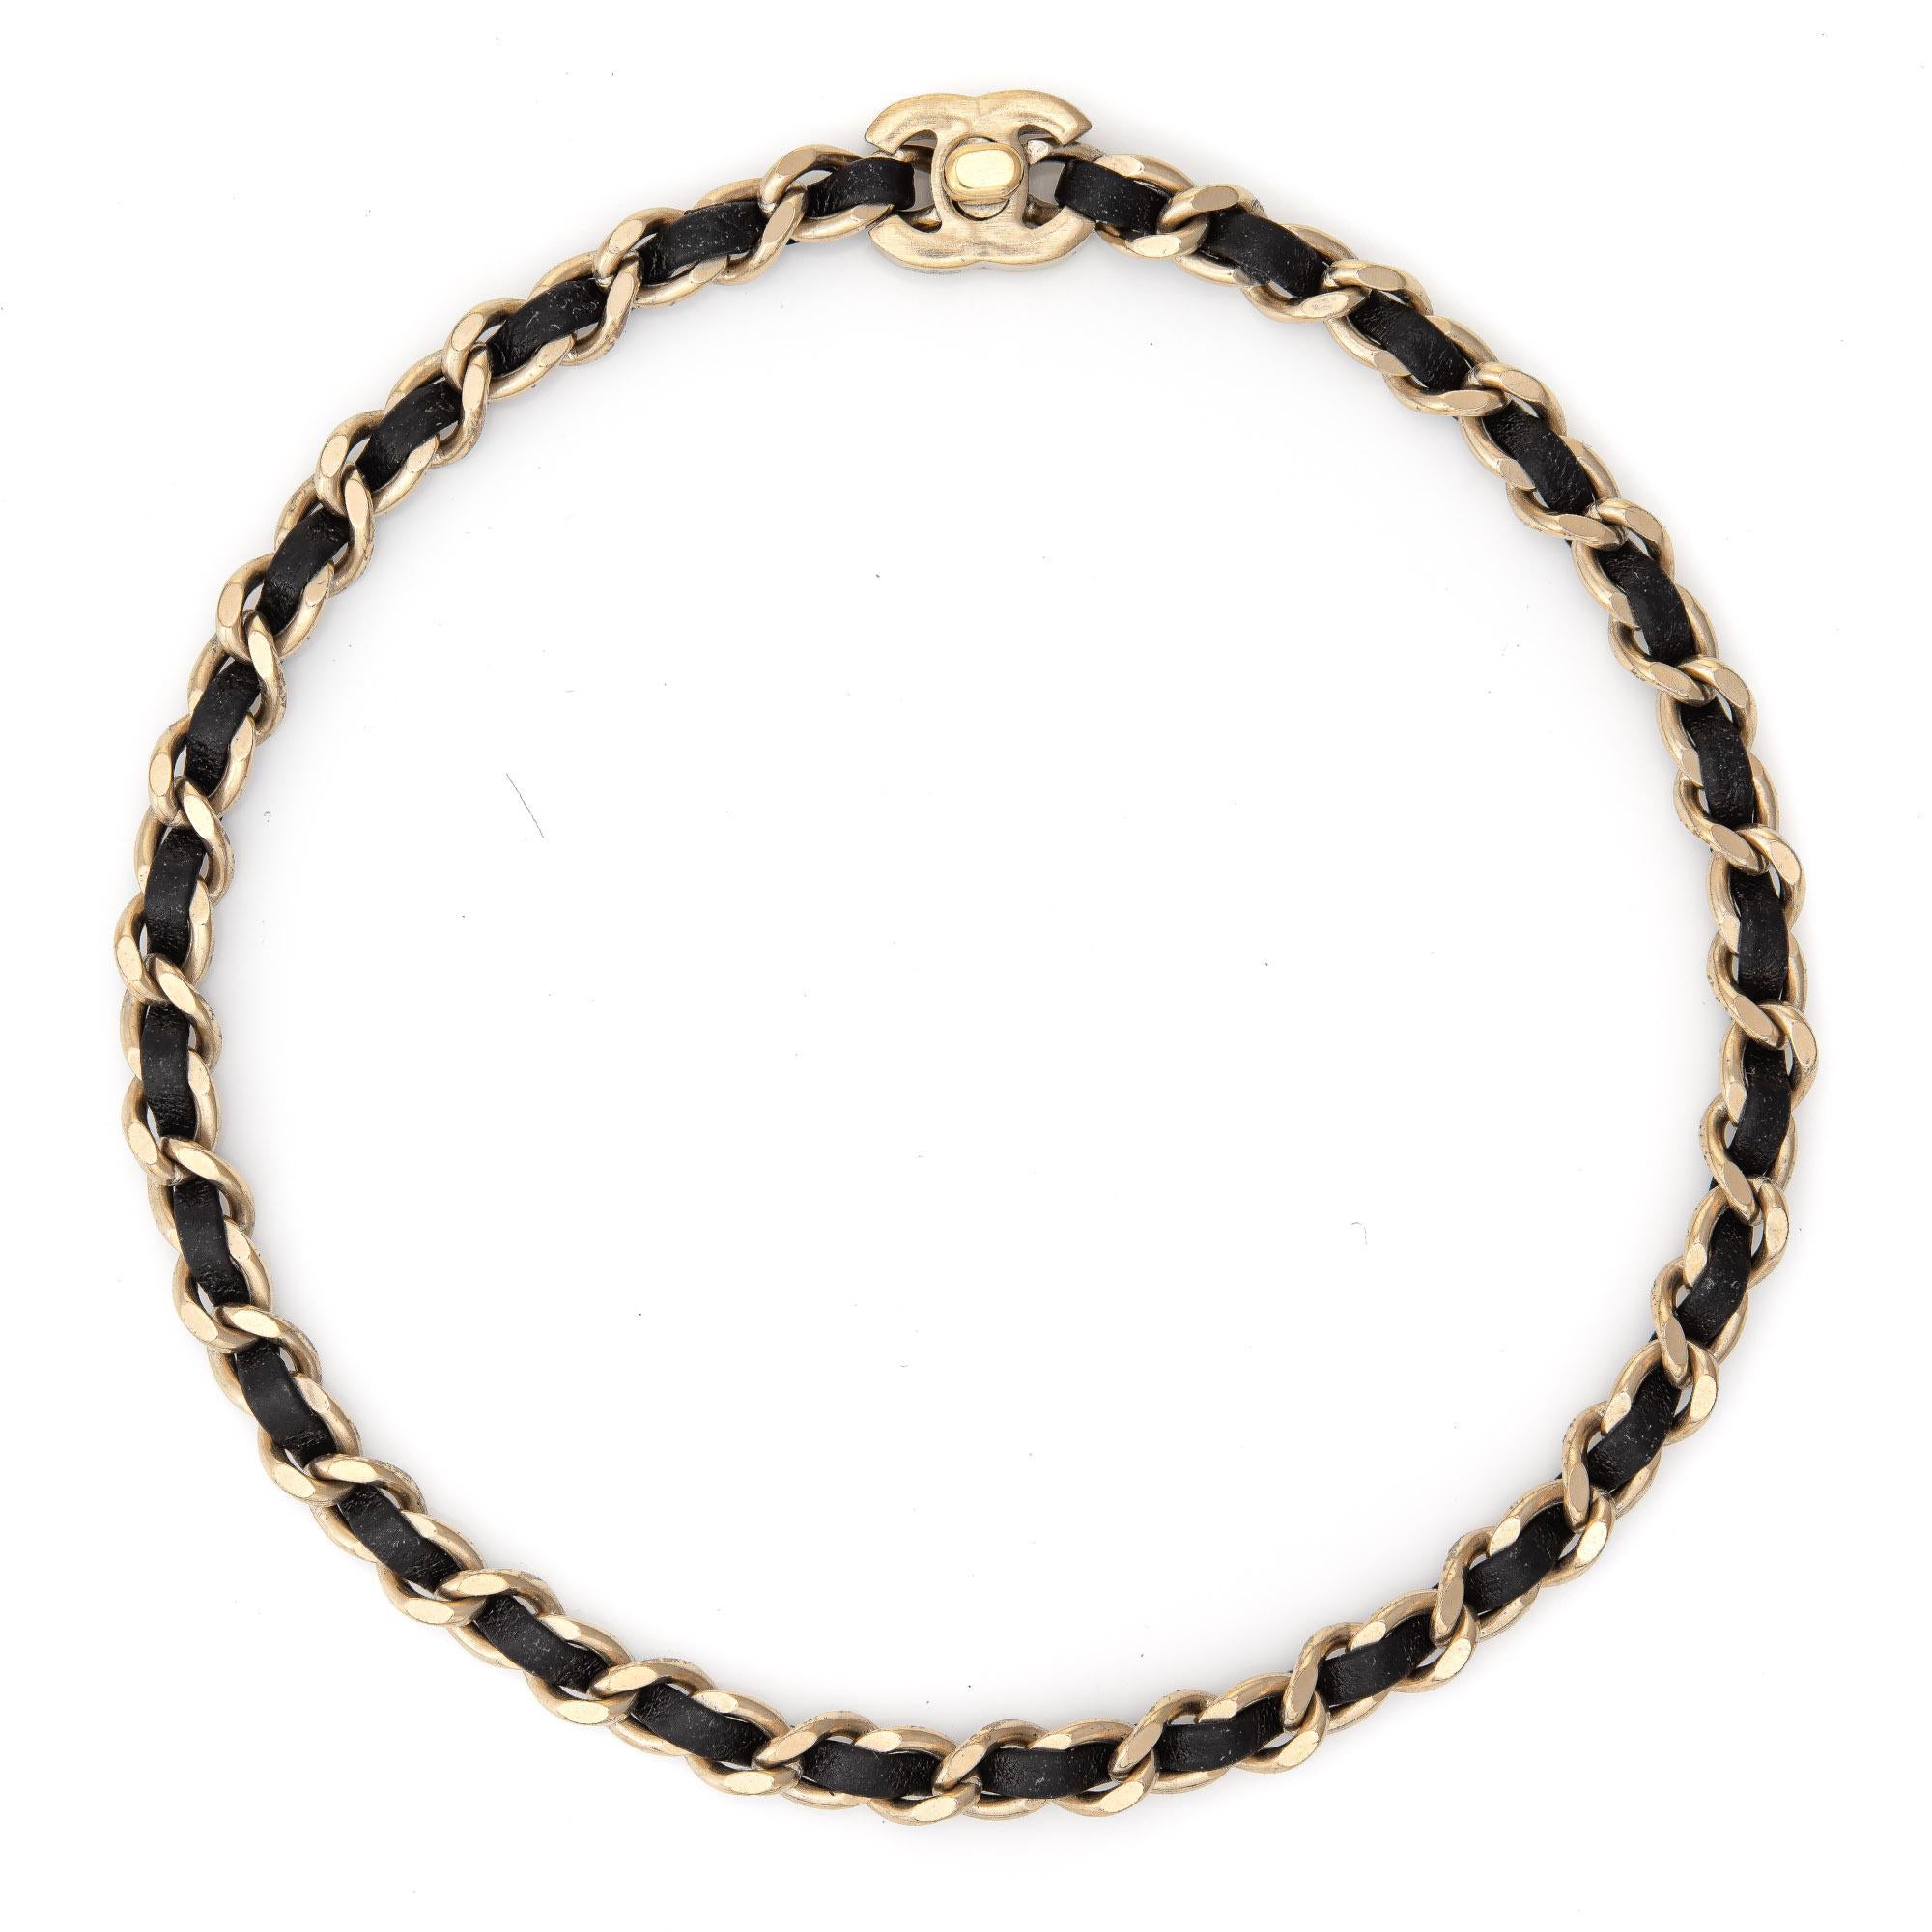 Pre-owned Chanel black leather chain link necklace crafted in yellow gold-tone (circa 2012) from the Spring collection. We also have available the matching silver-tone black leather chain link necklace. 

The black leather chain link necklace